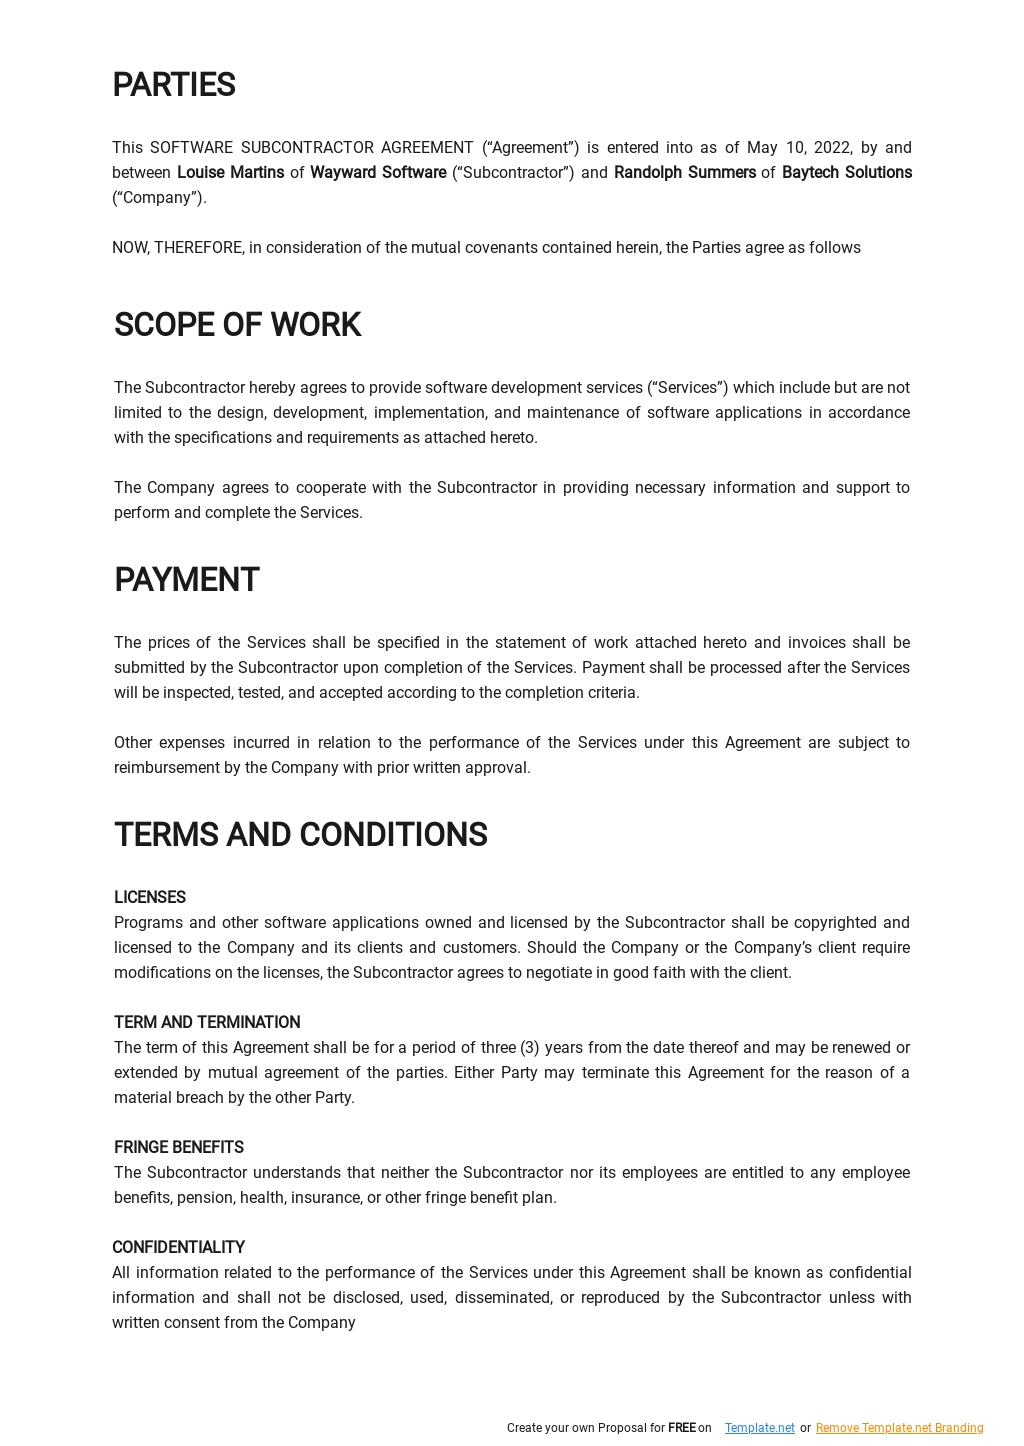 Software Subcontractor Agreement Template 1.jpe